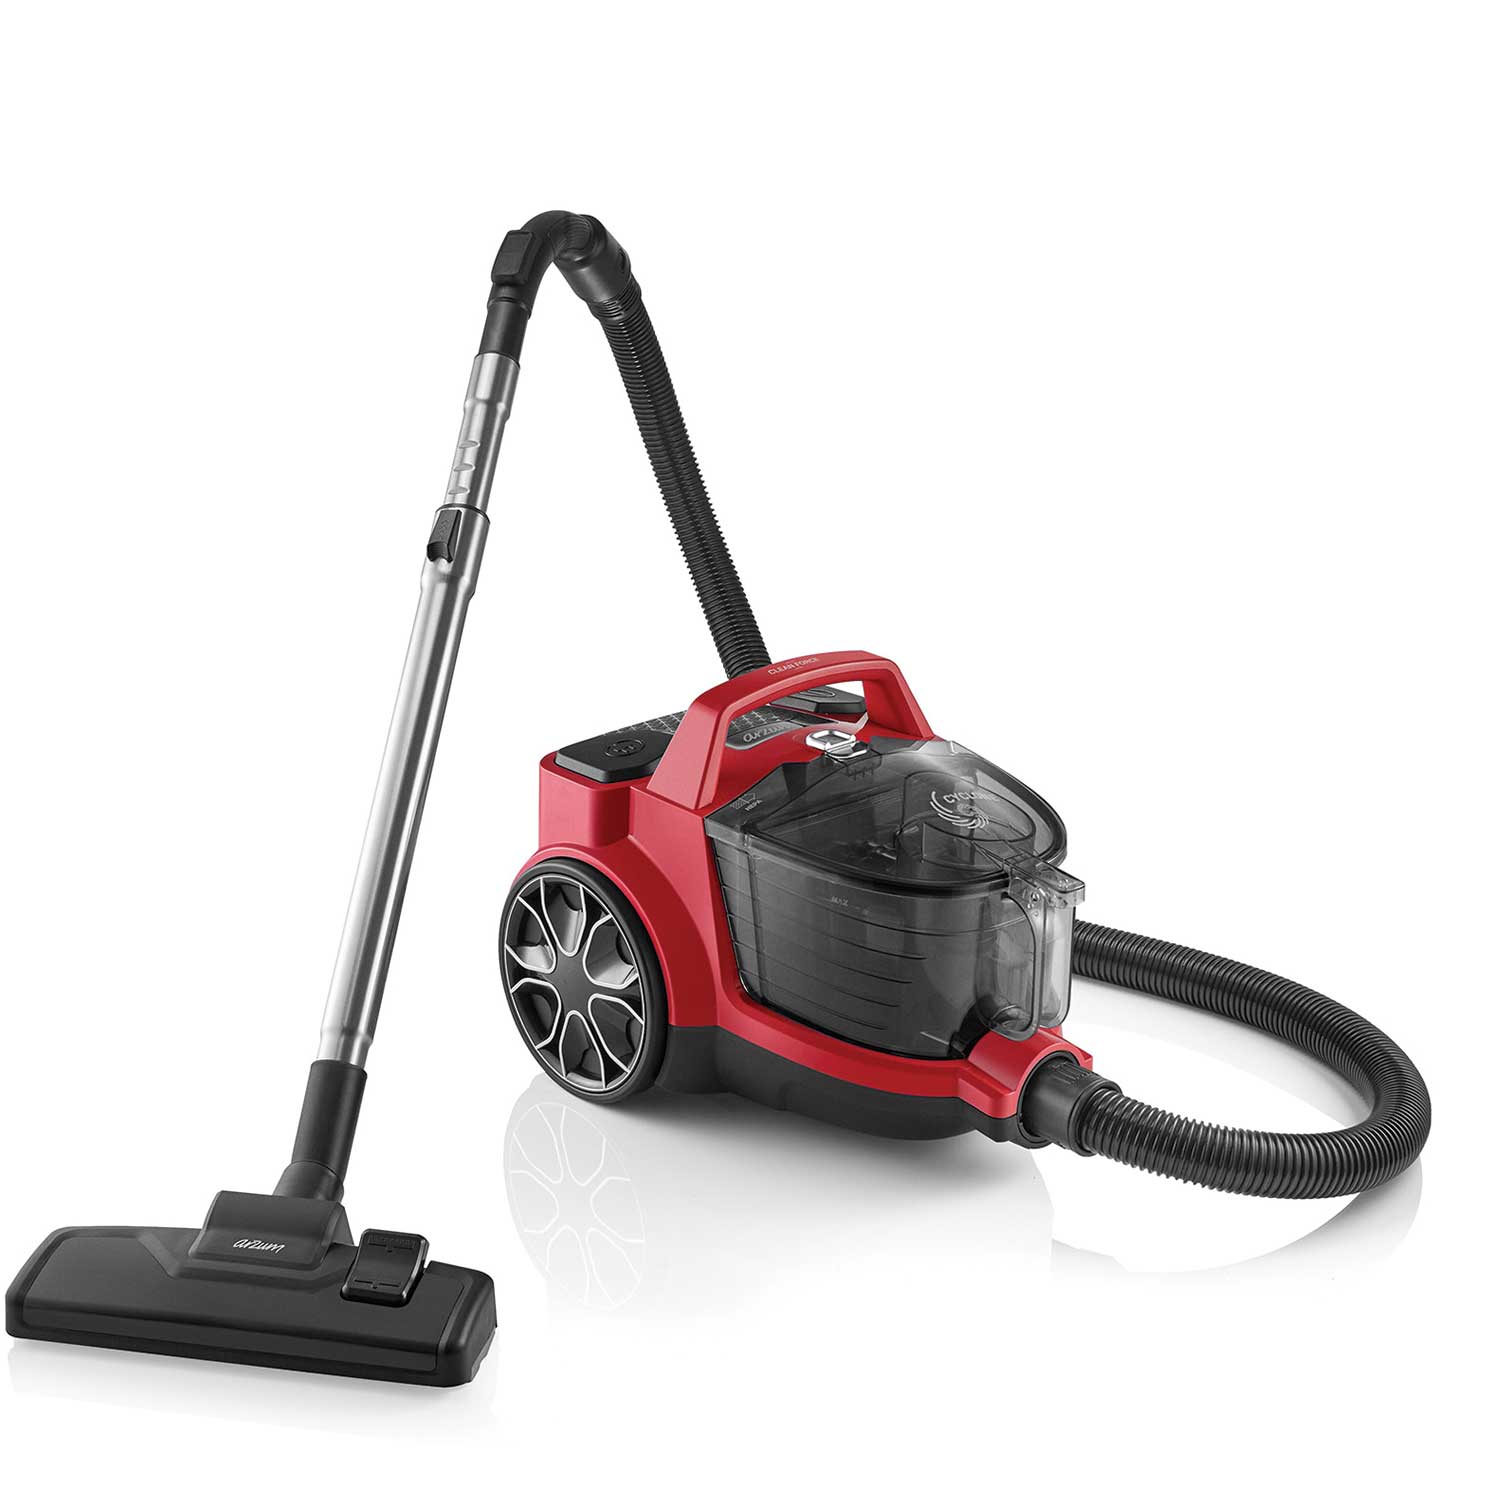 ARZUM - AR4071 Clean Force Red Cyclone Filter Vacuum Cleaner - Red